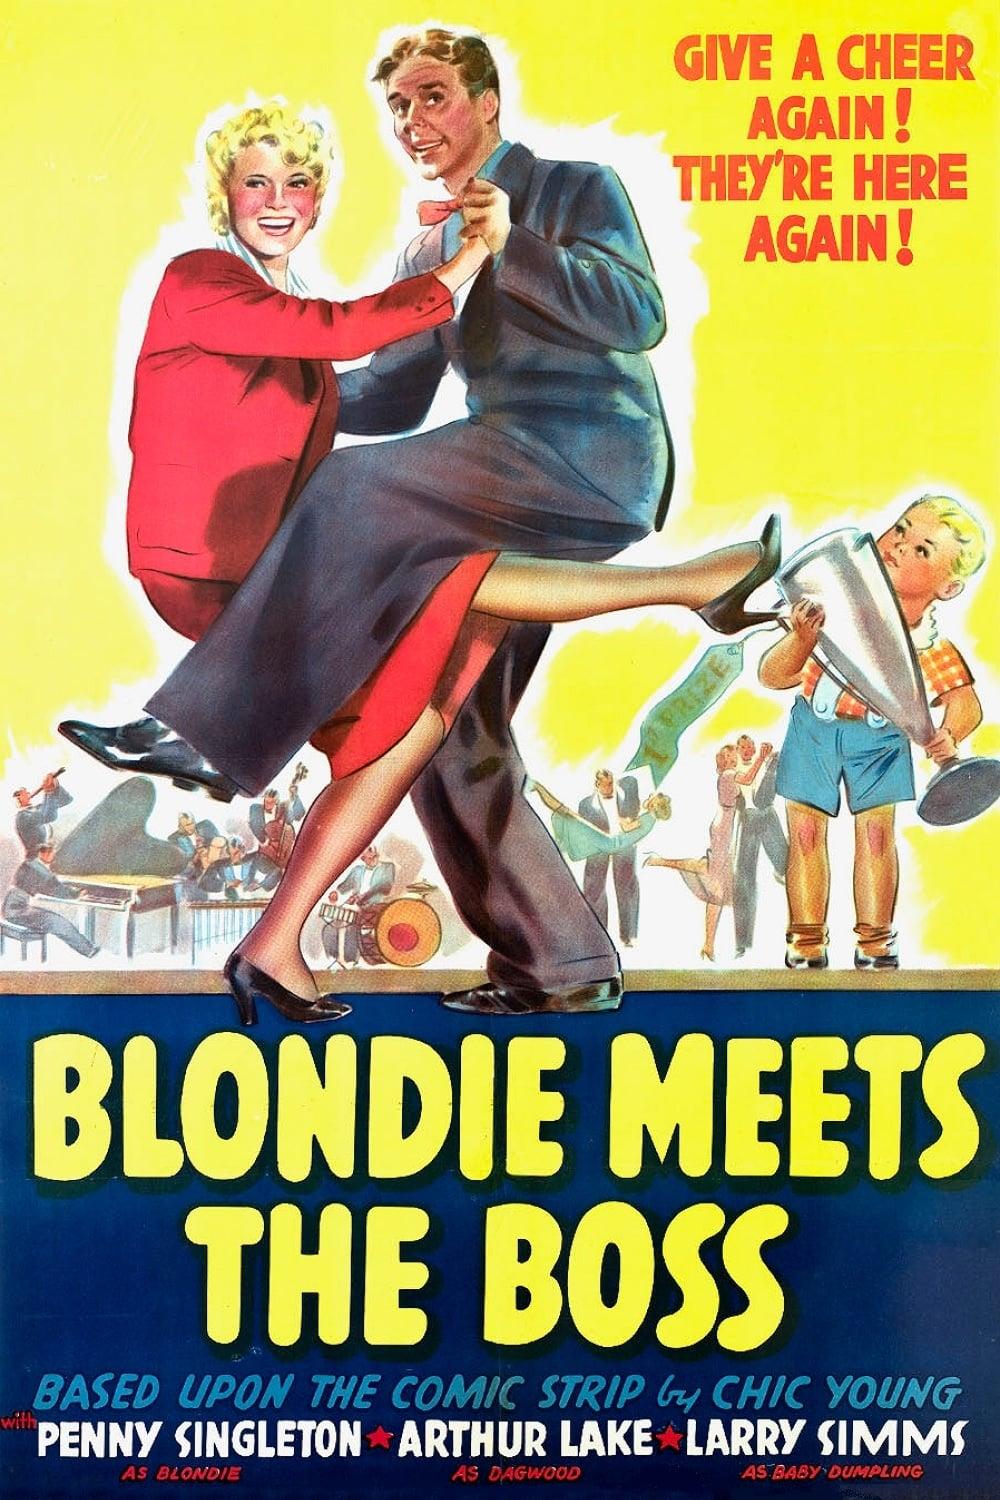 Blondie Meets the Boss poster